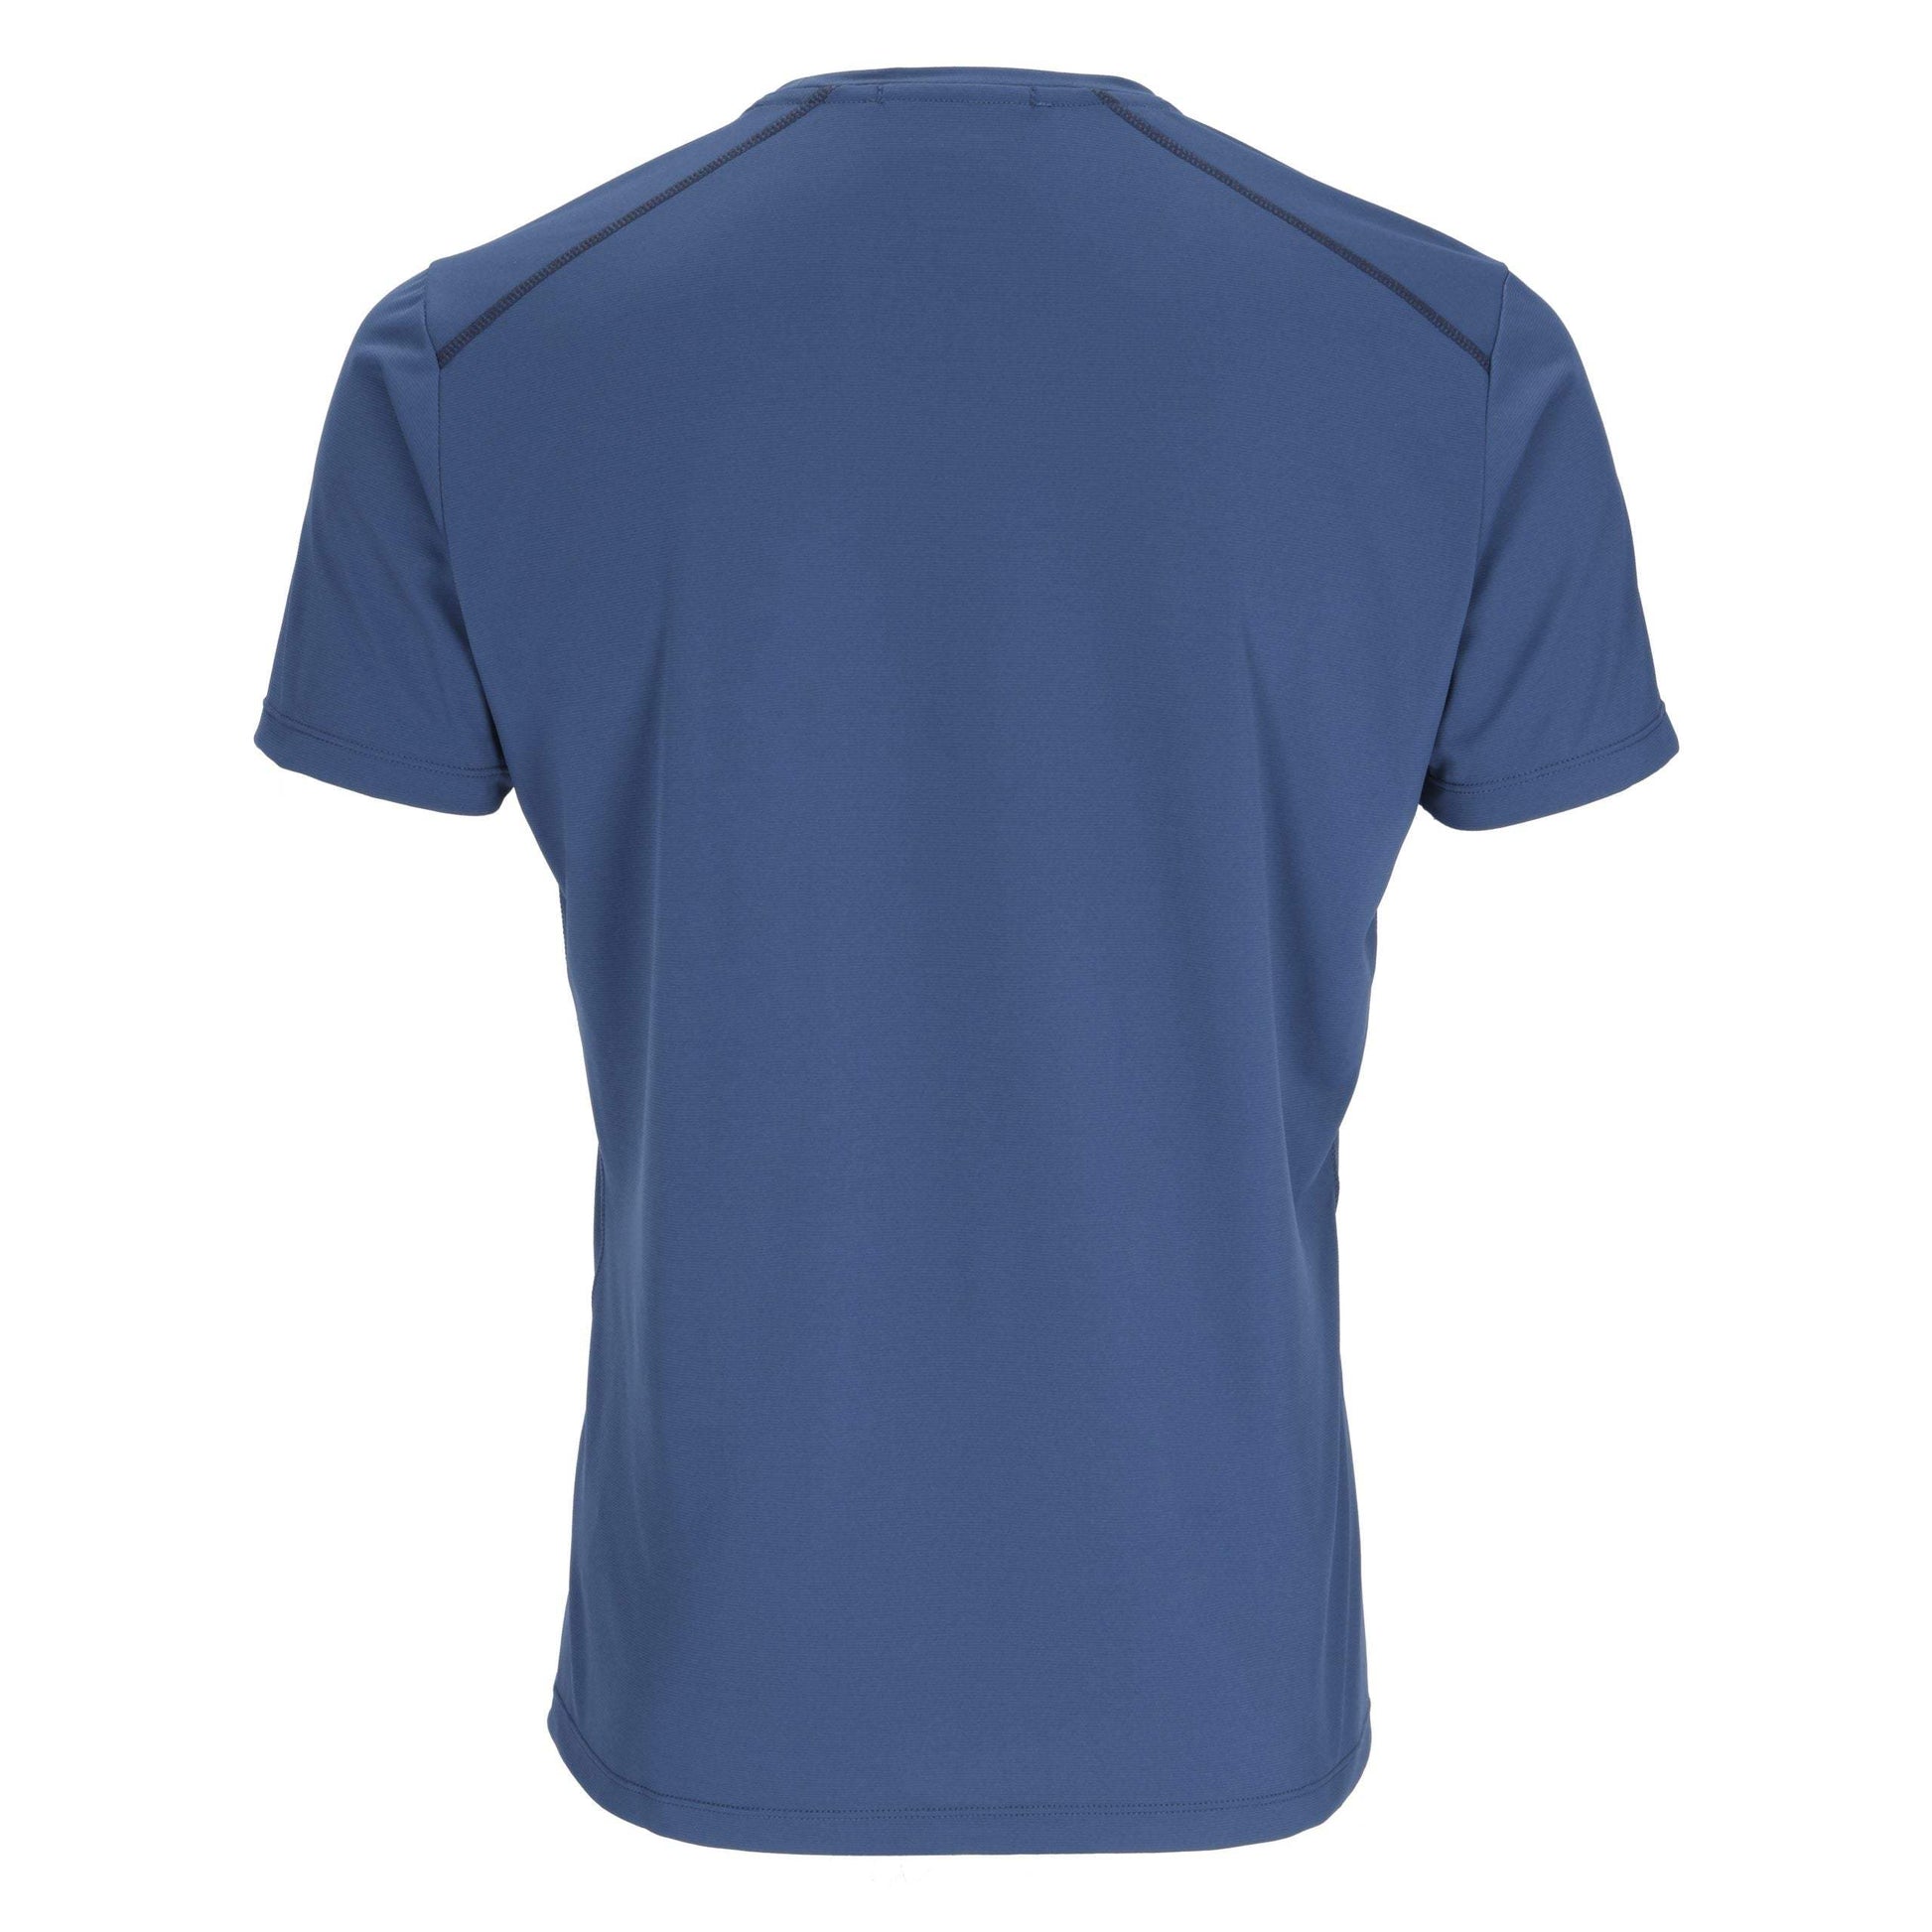 Men’s Force Tee by RAB - The Luxury Promotional Gifts Company Limited